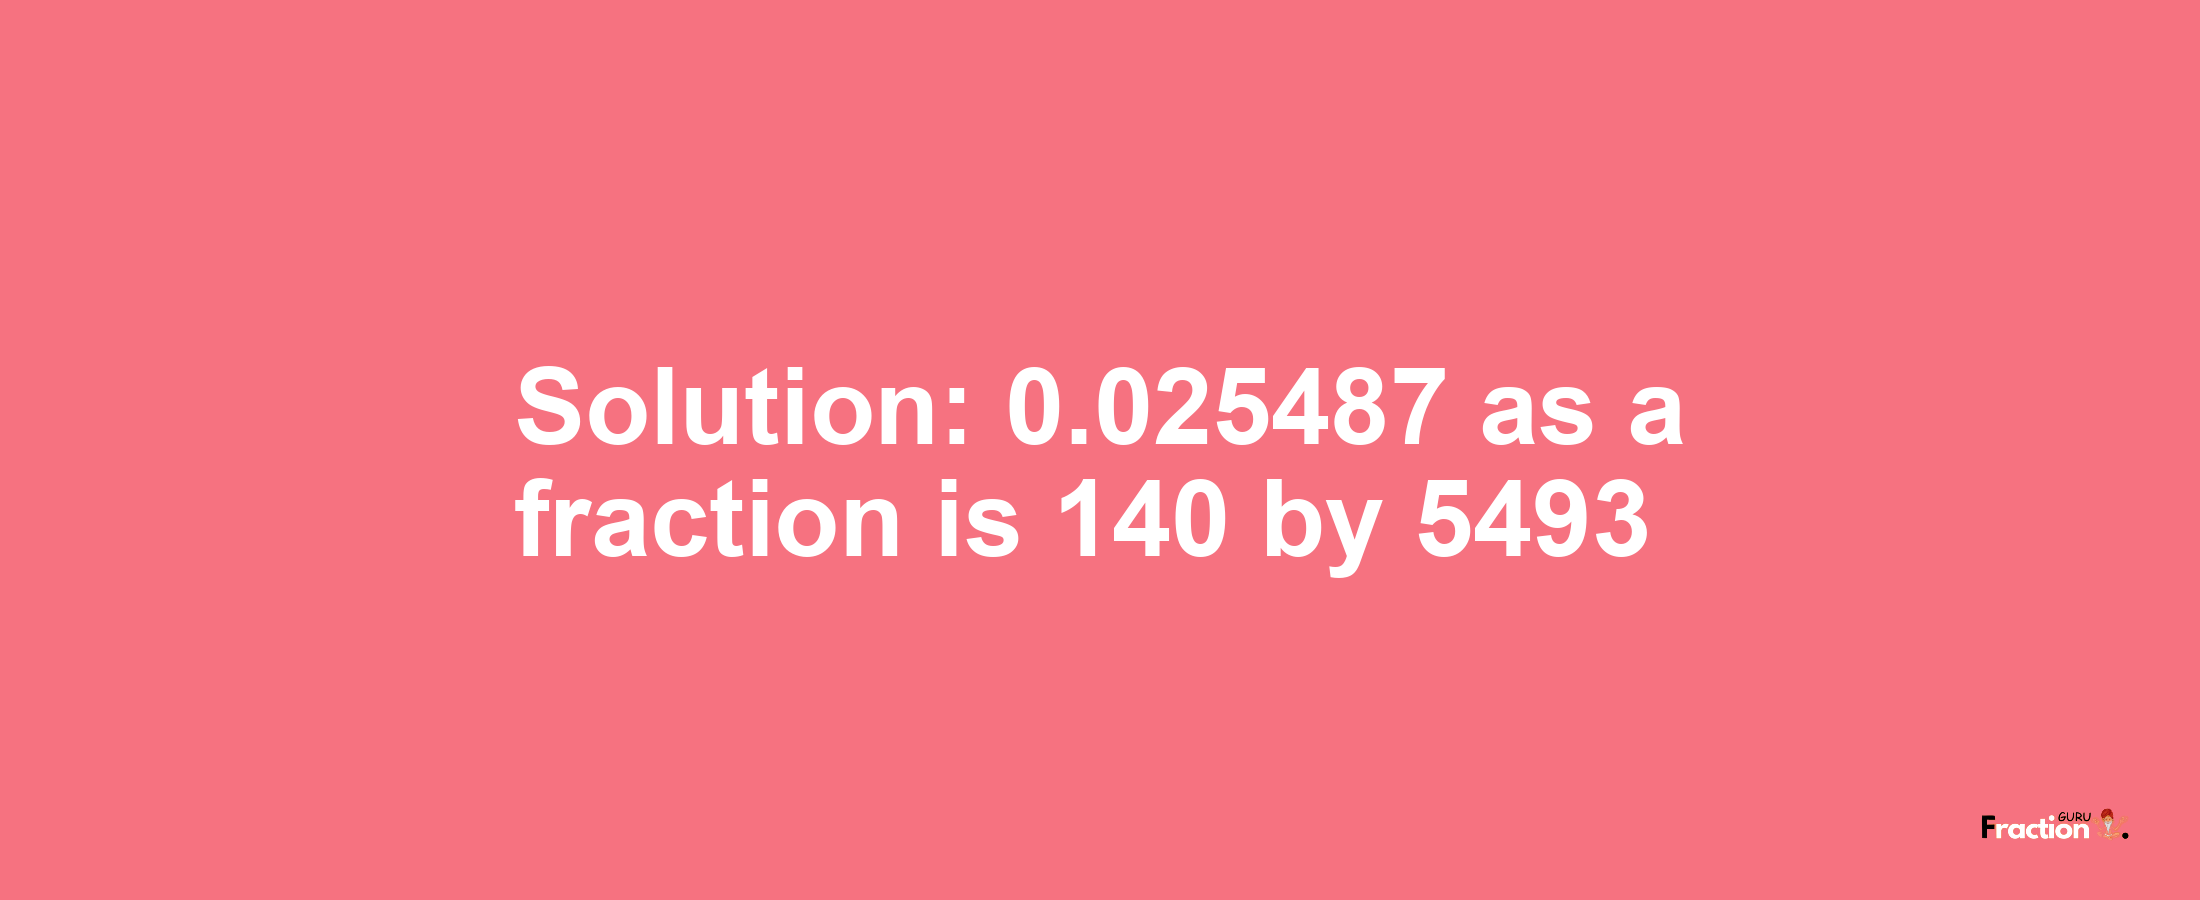 Solution:0.025487 as a fraction is 140/5493